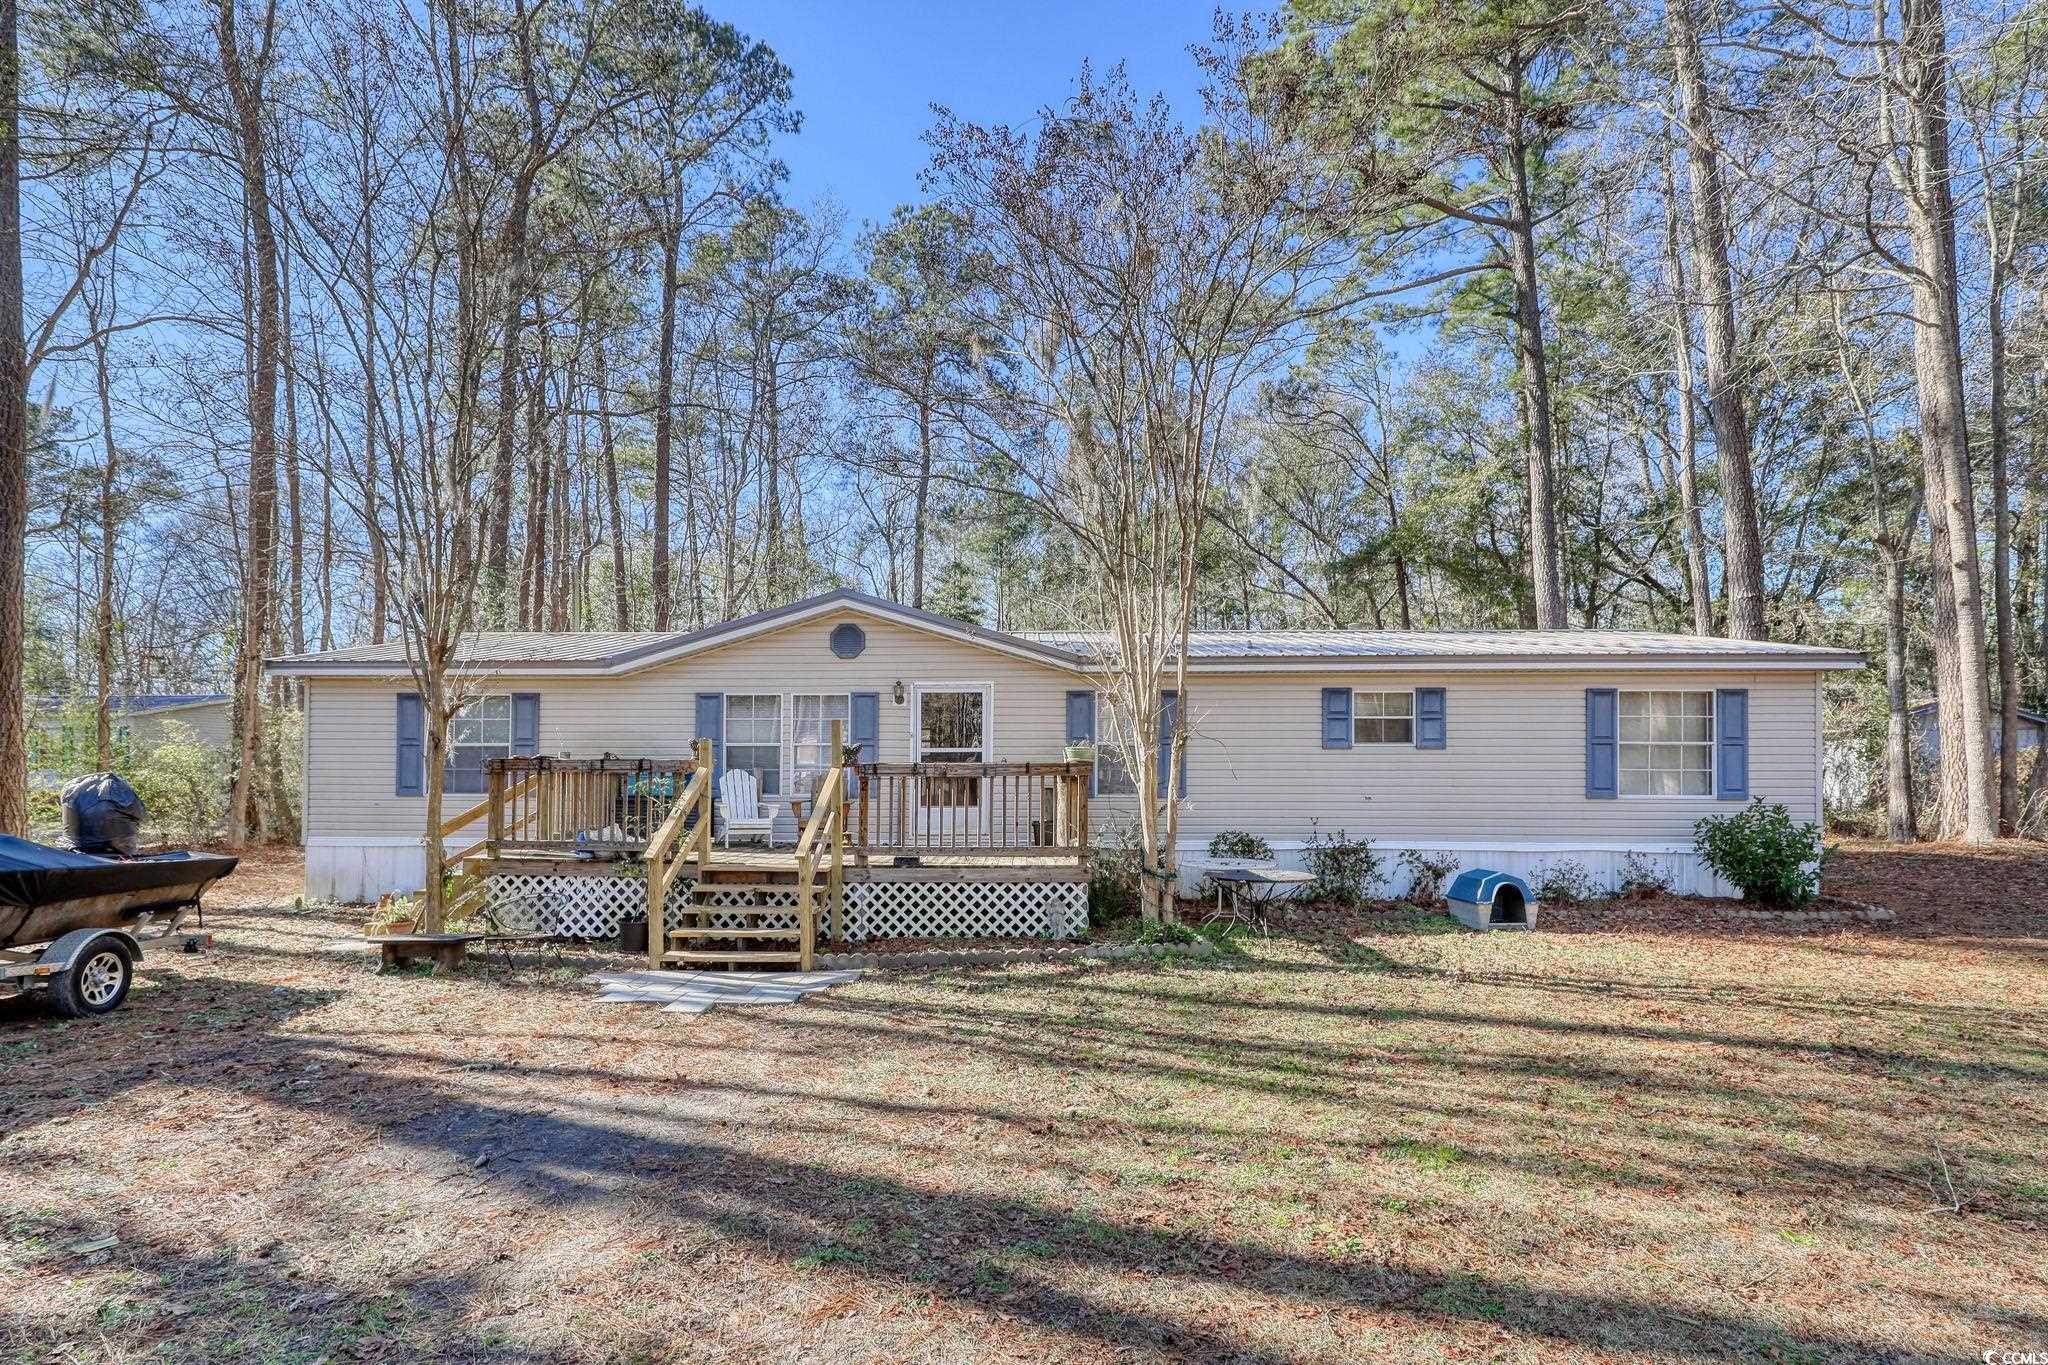 2008 Lee St. Conway, SC 29526